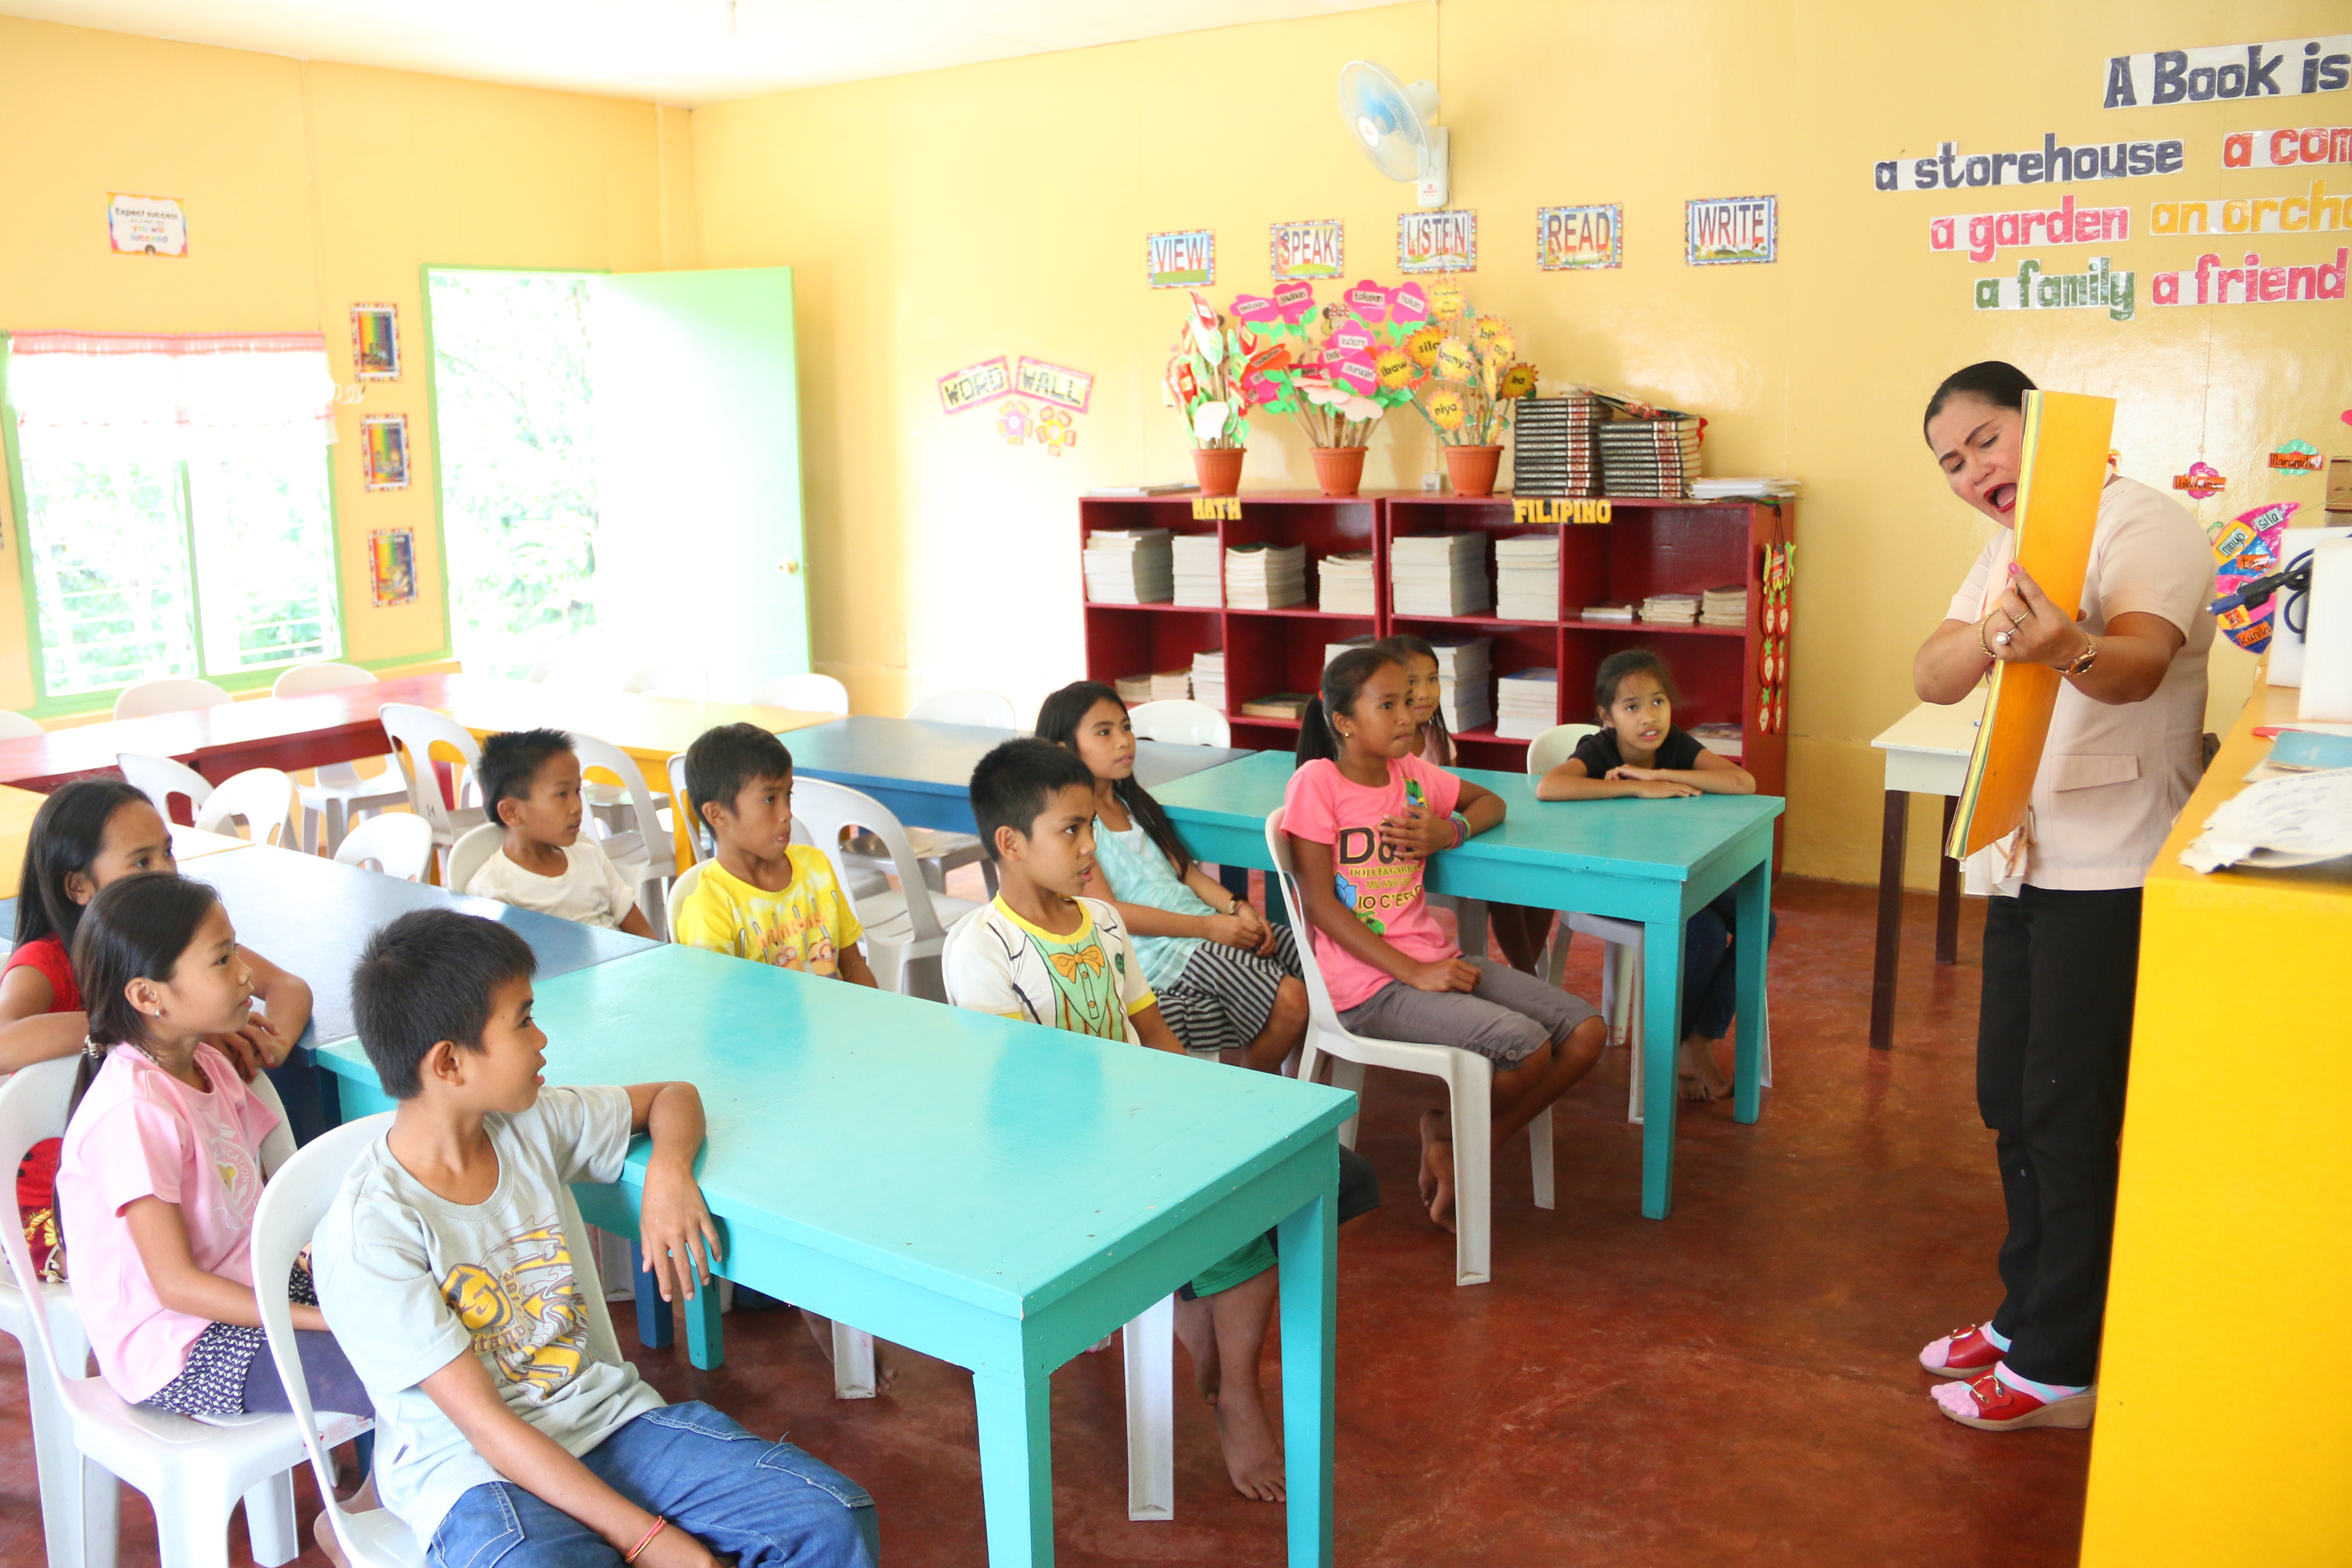 World Vision works in Zamboanga del Norte for more than 5 years already. Building classrooms, reading hubs and donating learning materials, are part of the organization’s commitment to improve the reading and writing skills of students.